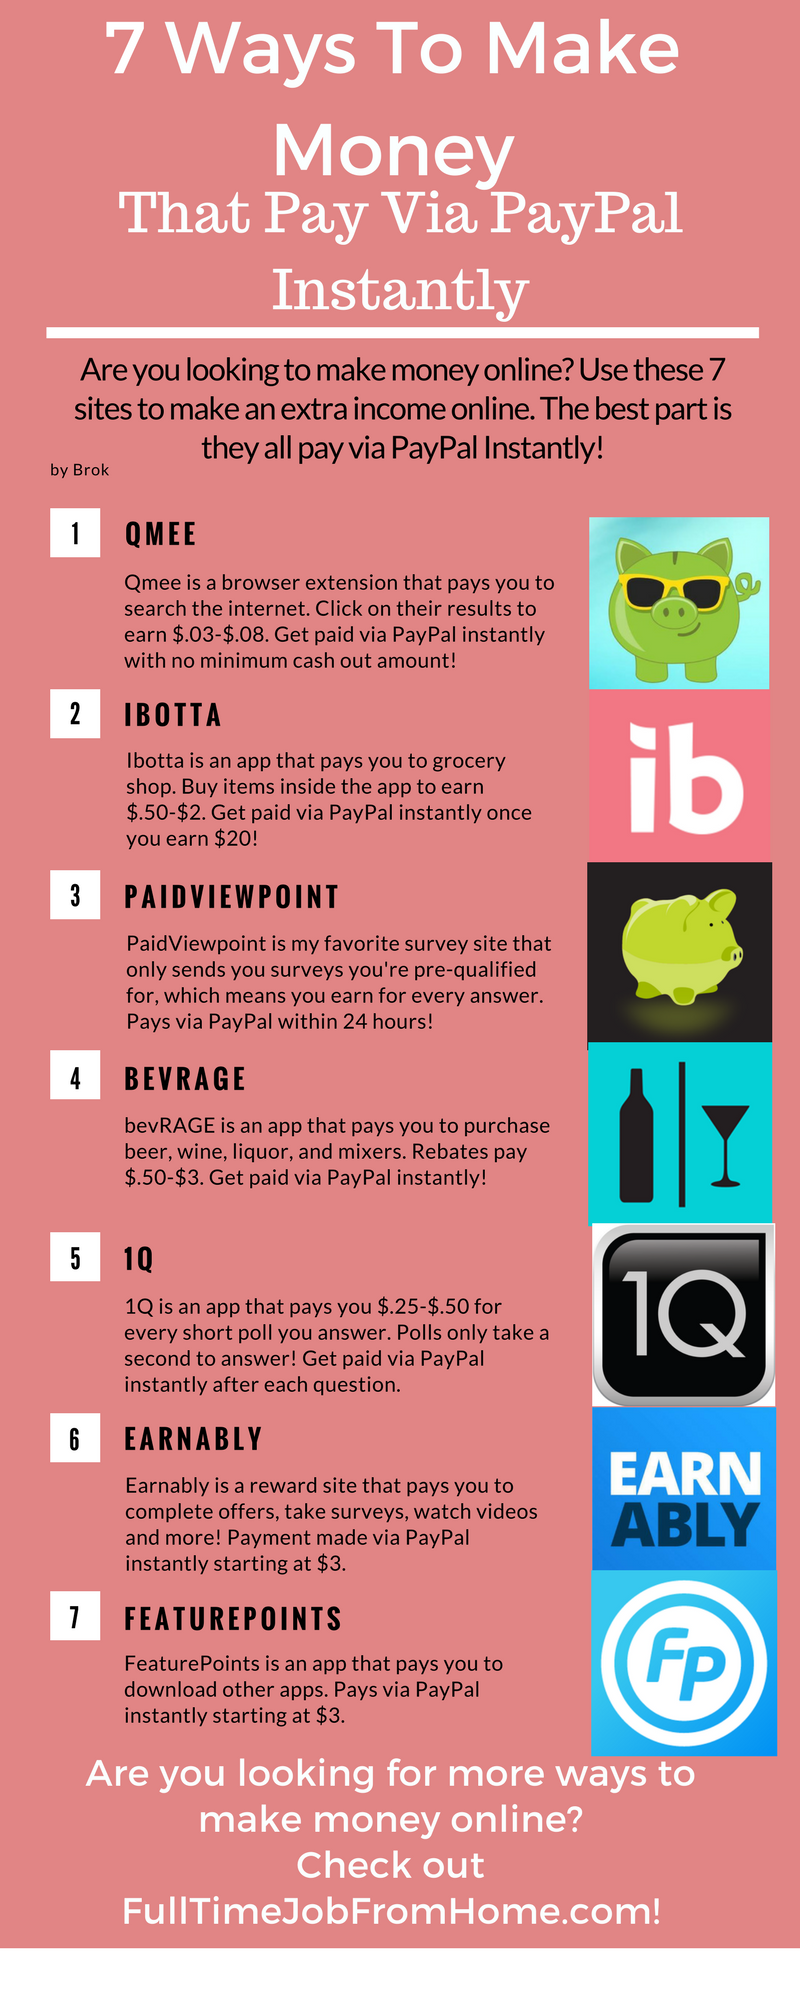 Are you looking to make an extra income online? Here're 7 Sites that you can use to make money and the best part is they pay via PayPal instantly!